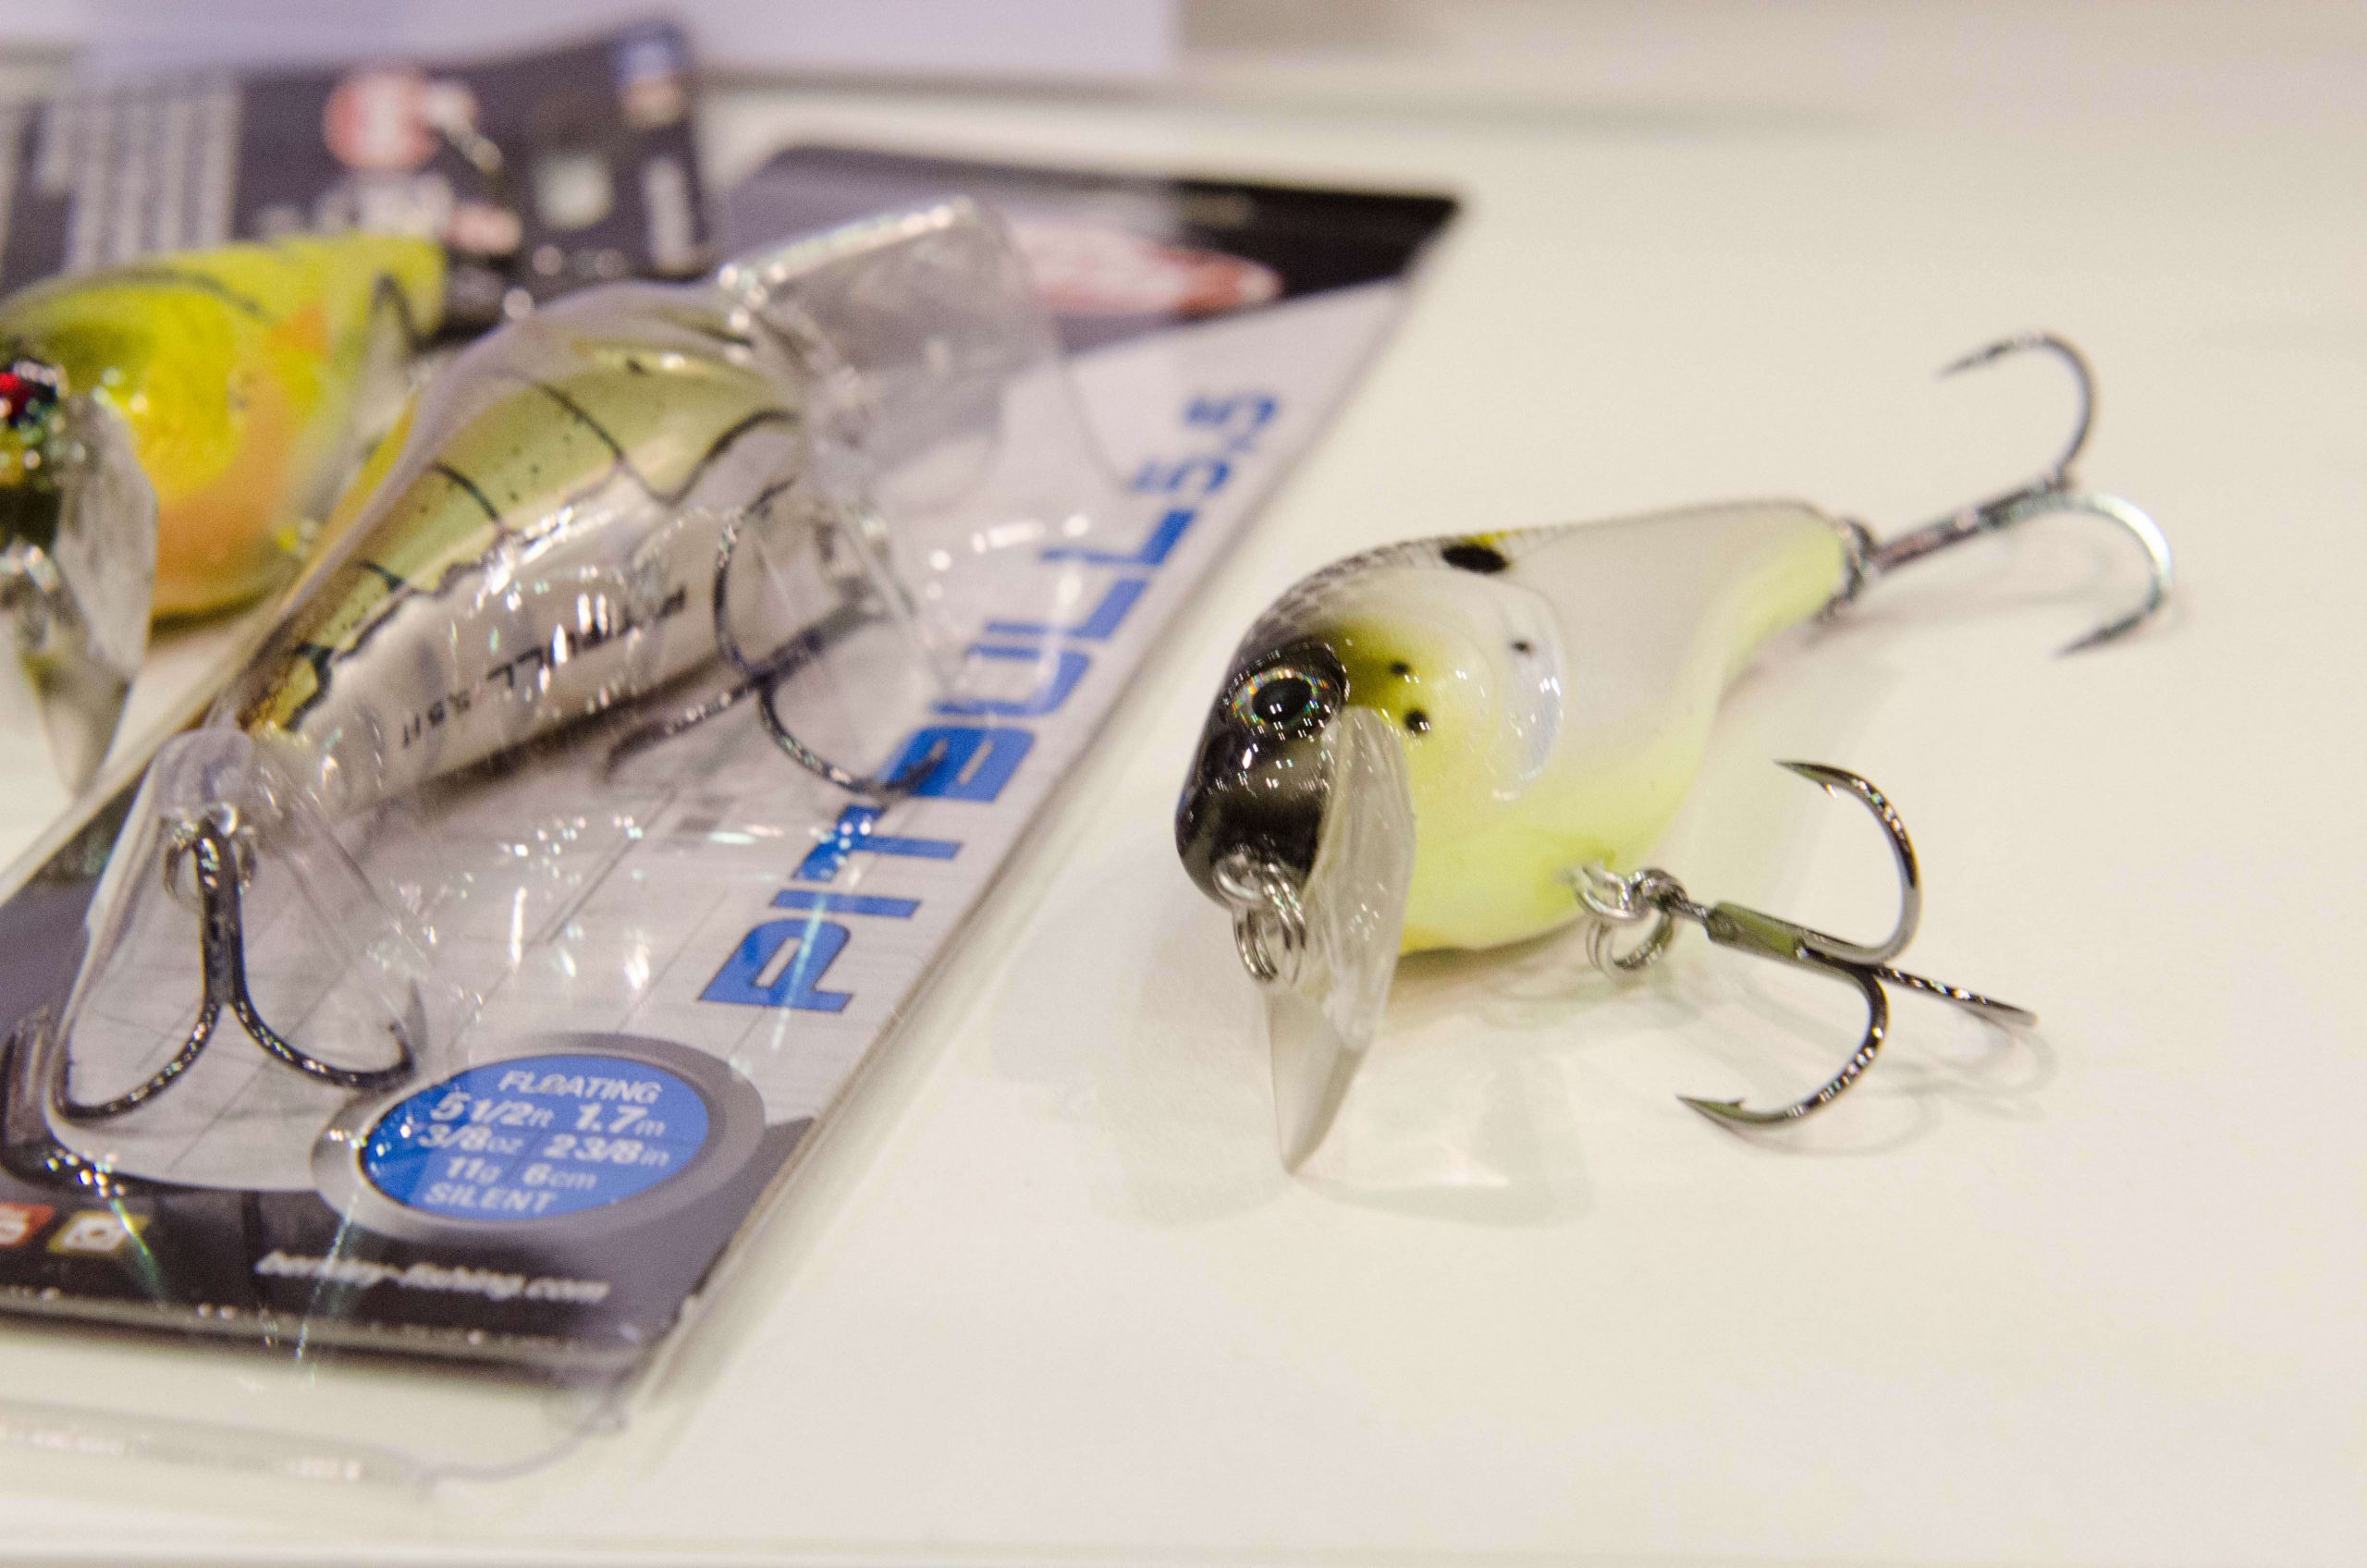 Berkley introduced the Pit Bull, a square-lip hard bait designed to cast further and provide an erratic hunting action in the water.